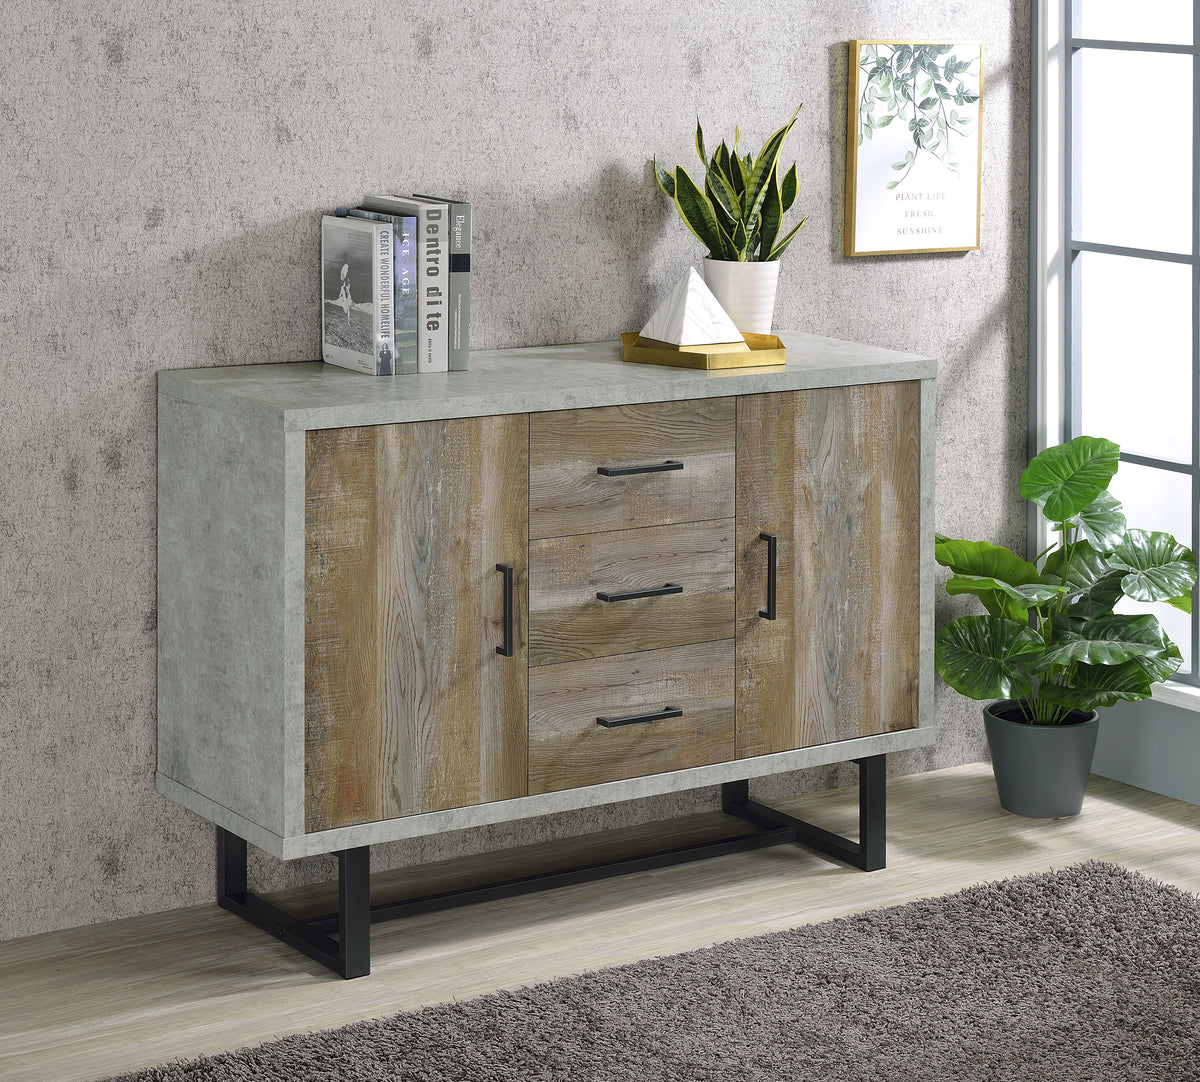 Abelardo 3-drawer Accent Cabinet Weathered Oak and Cement  Las Vegas Furniture Stores